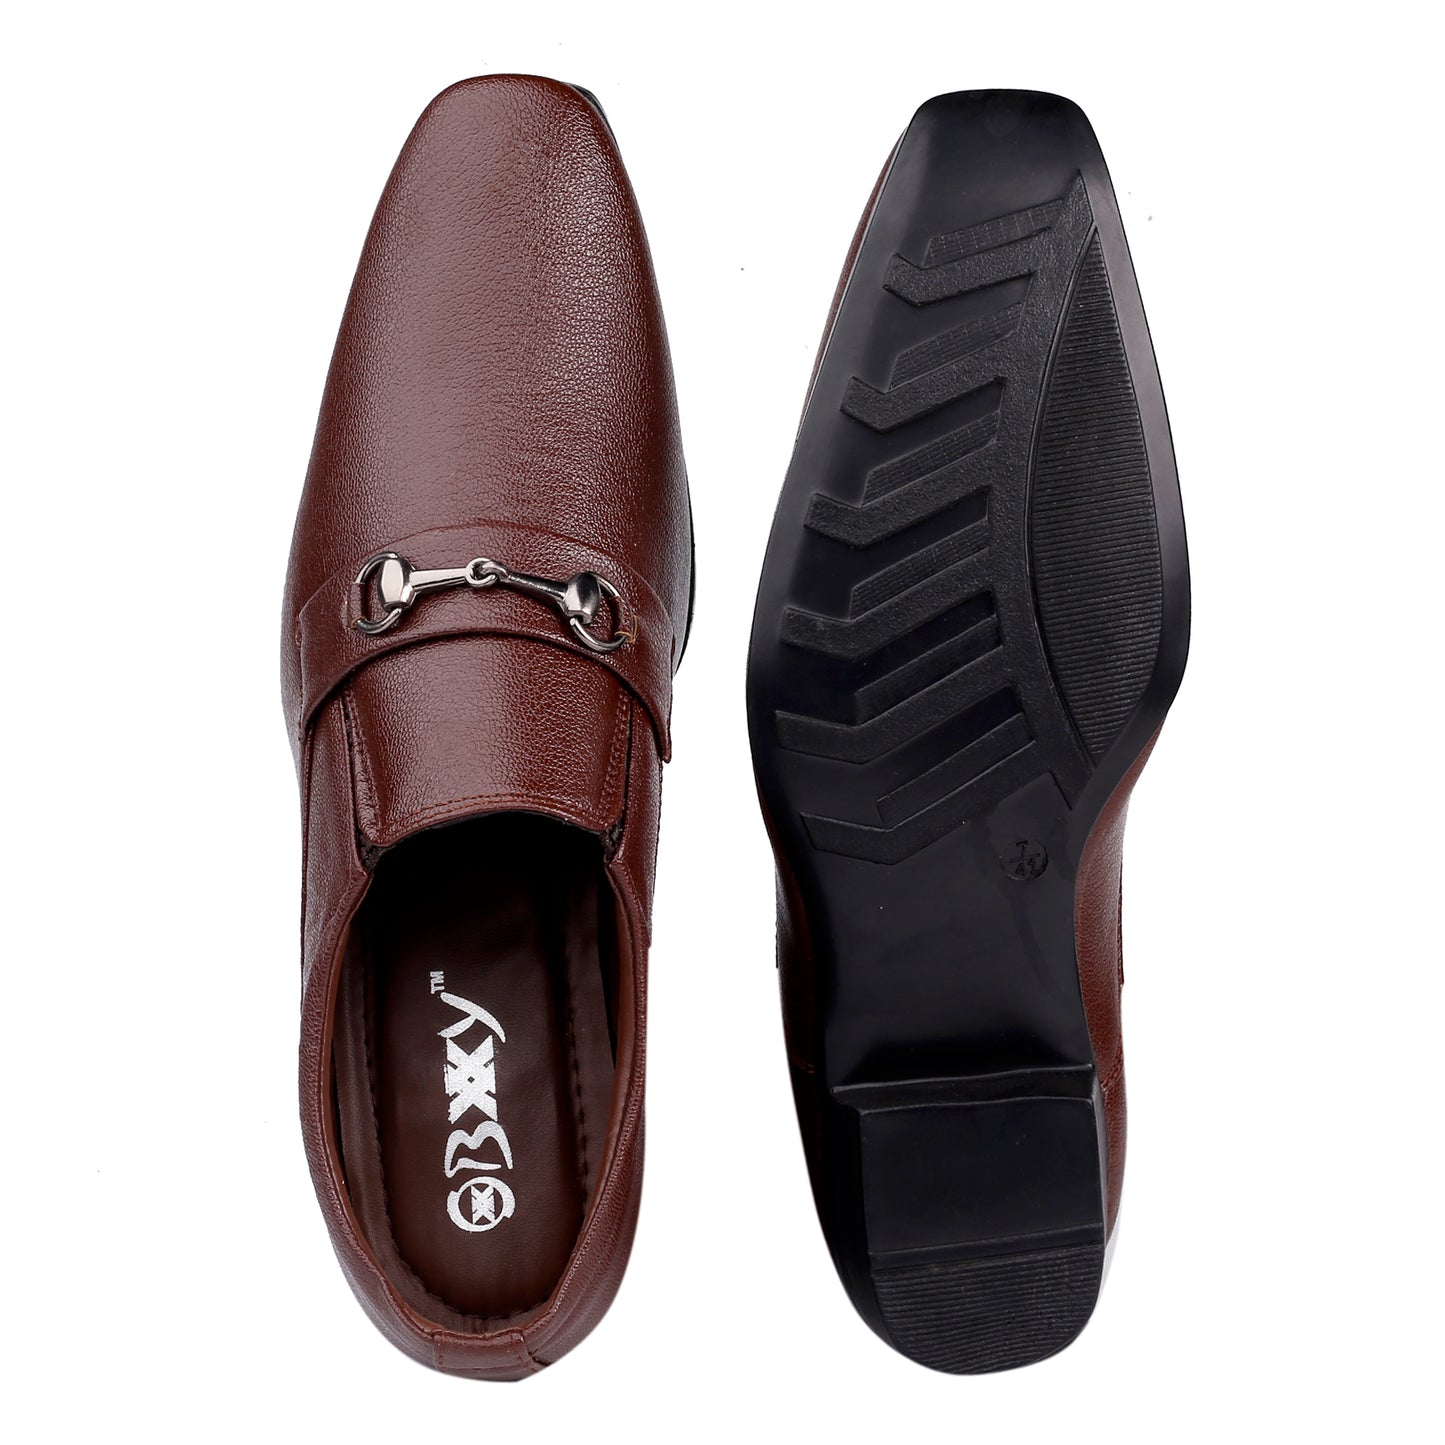 BXXY Men's Formal and Casual Wear Height Increasing Slip-On Stylish and Latest Buckle Shoes